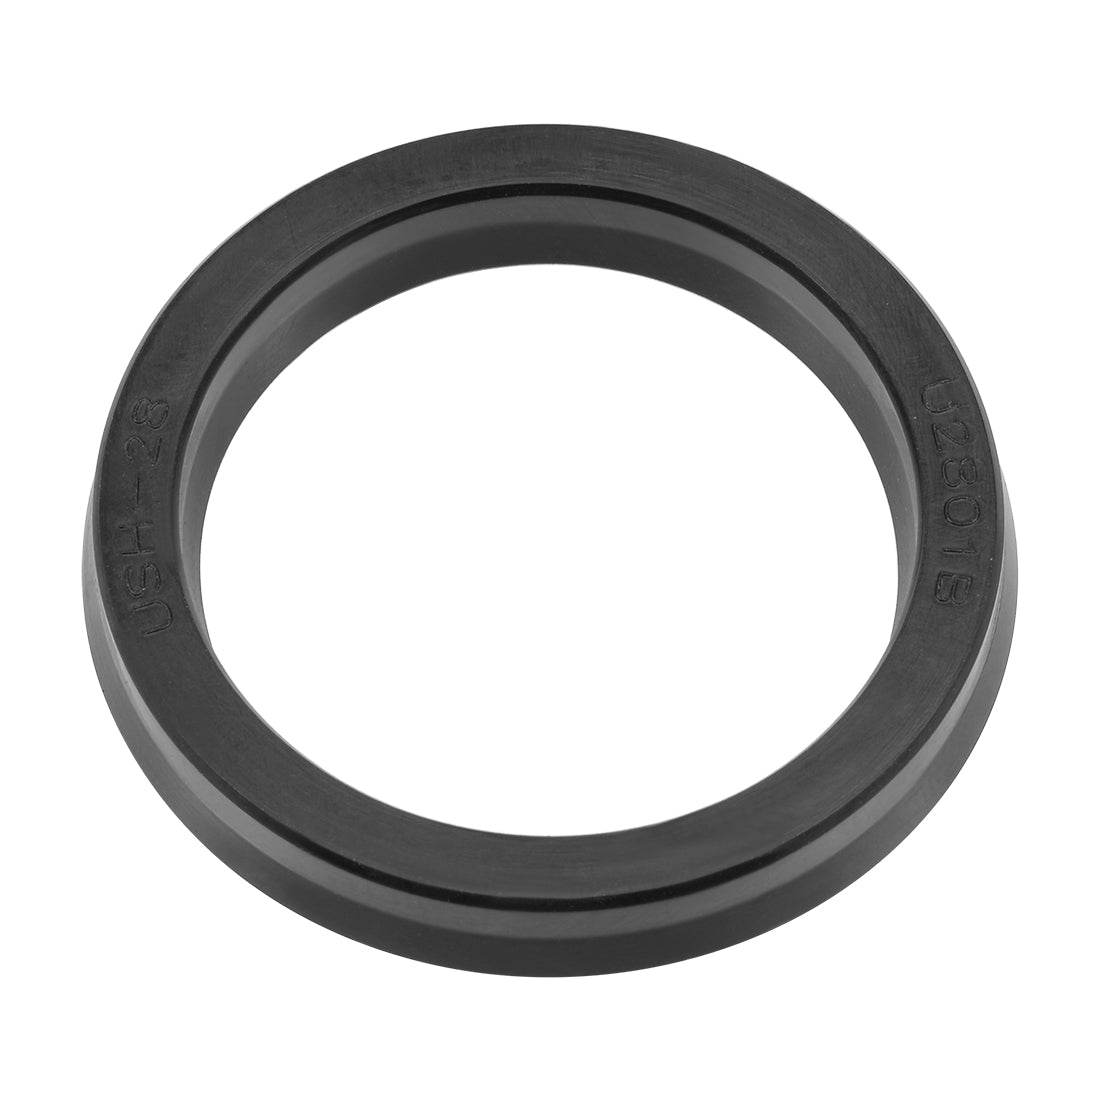 uxcell Uxcell Hydraulic Seal, Piston Shaft USH Oil Sealing O-Ring, 28mm x 35mm x 5mm